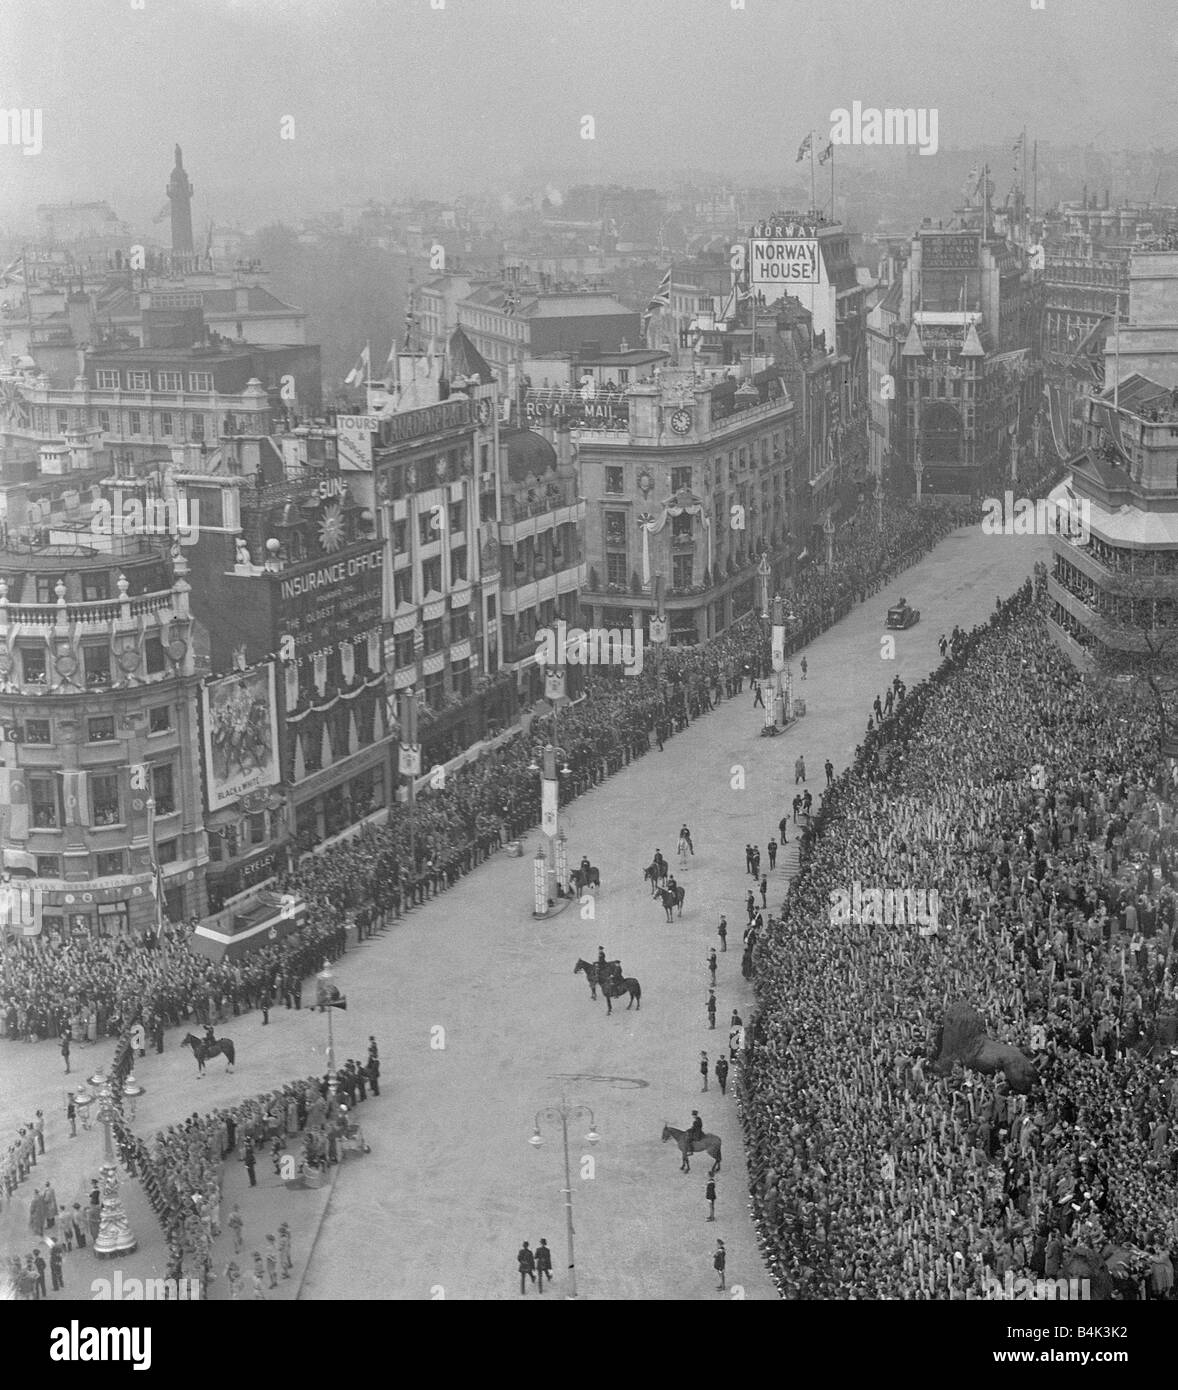 George VI Coronation London Trafalgar Square May 1937 The crowds around a packed Trafalgar Square wait for the Kings procession Stock Photo